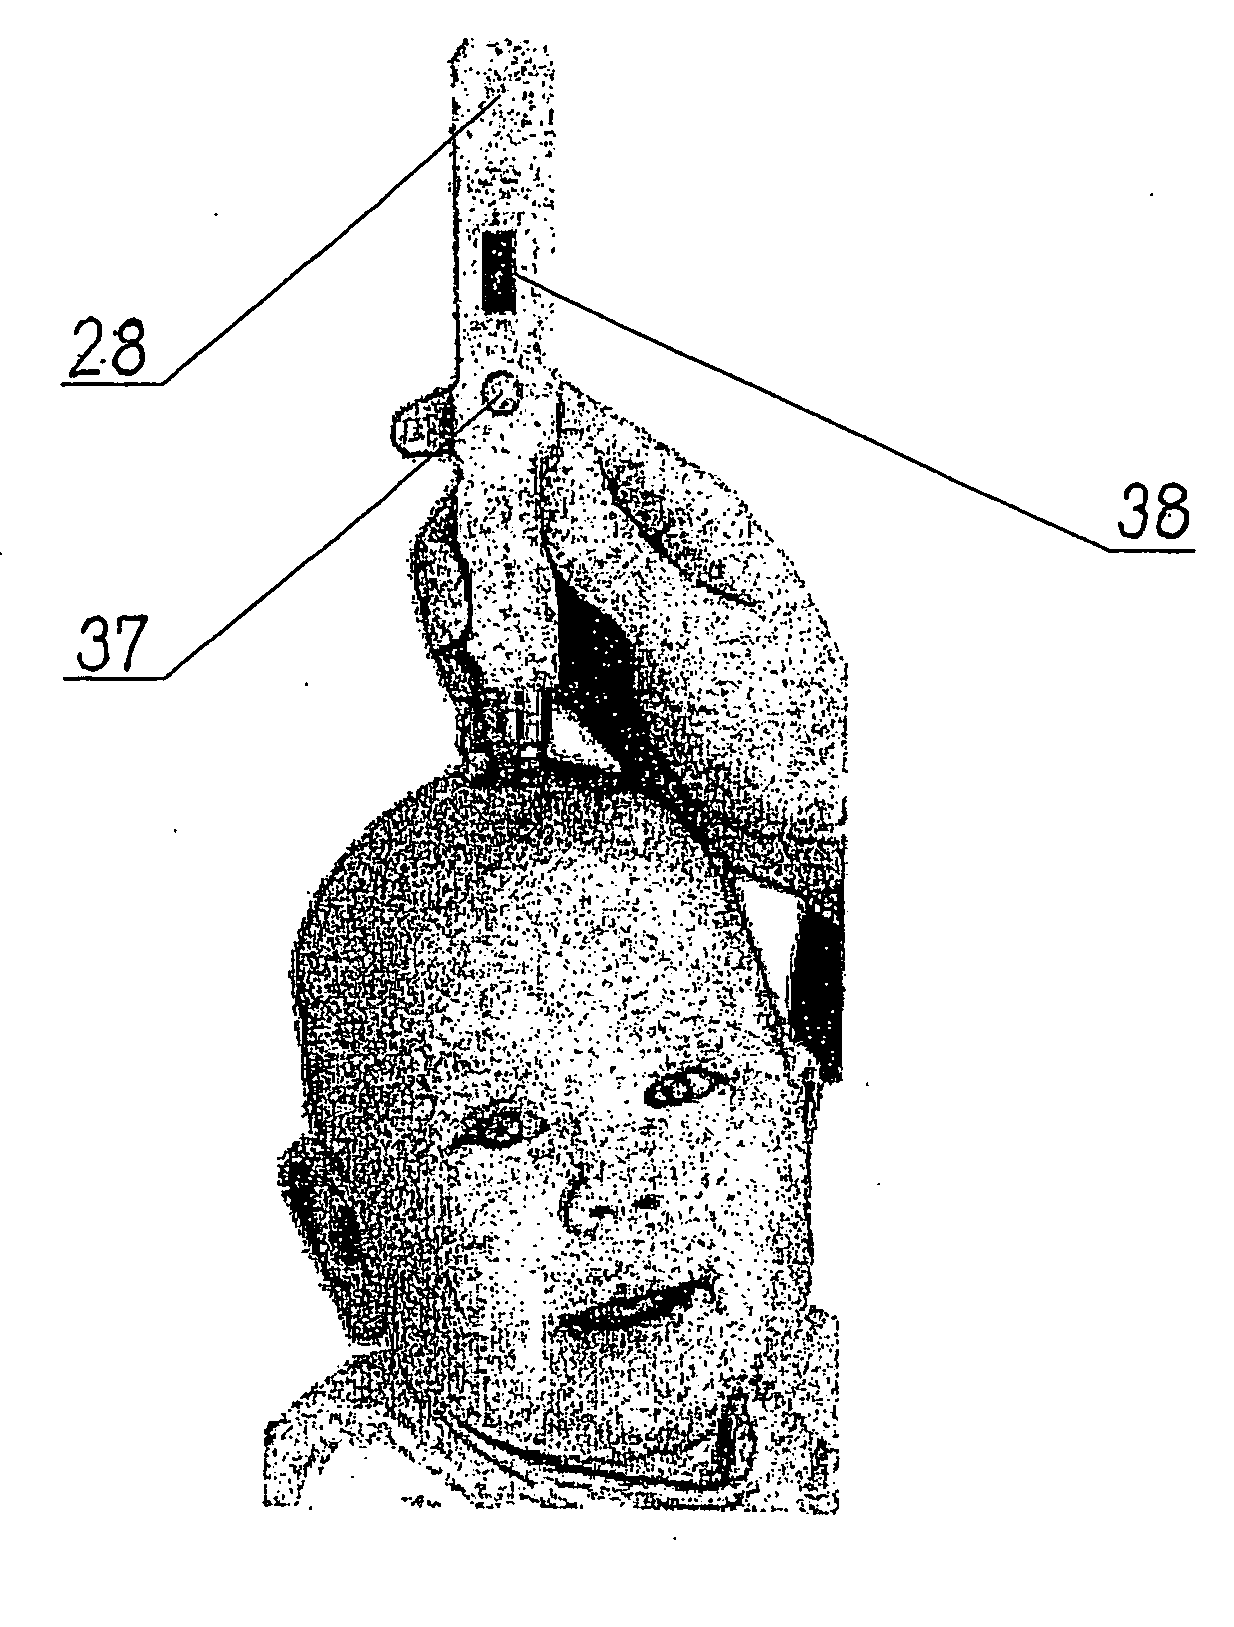 Device for measuring intracranial pressure in newborns and babies and a supporting member for said device